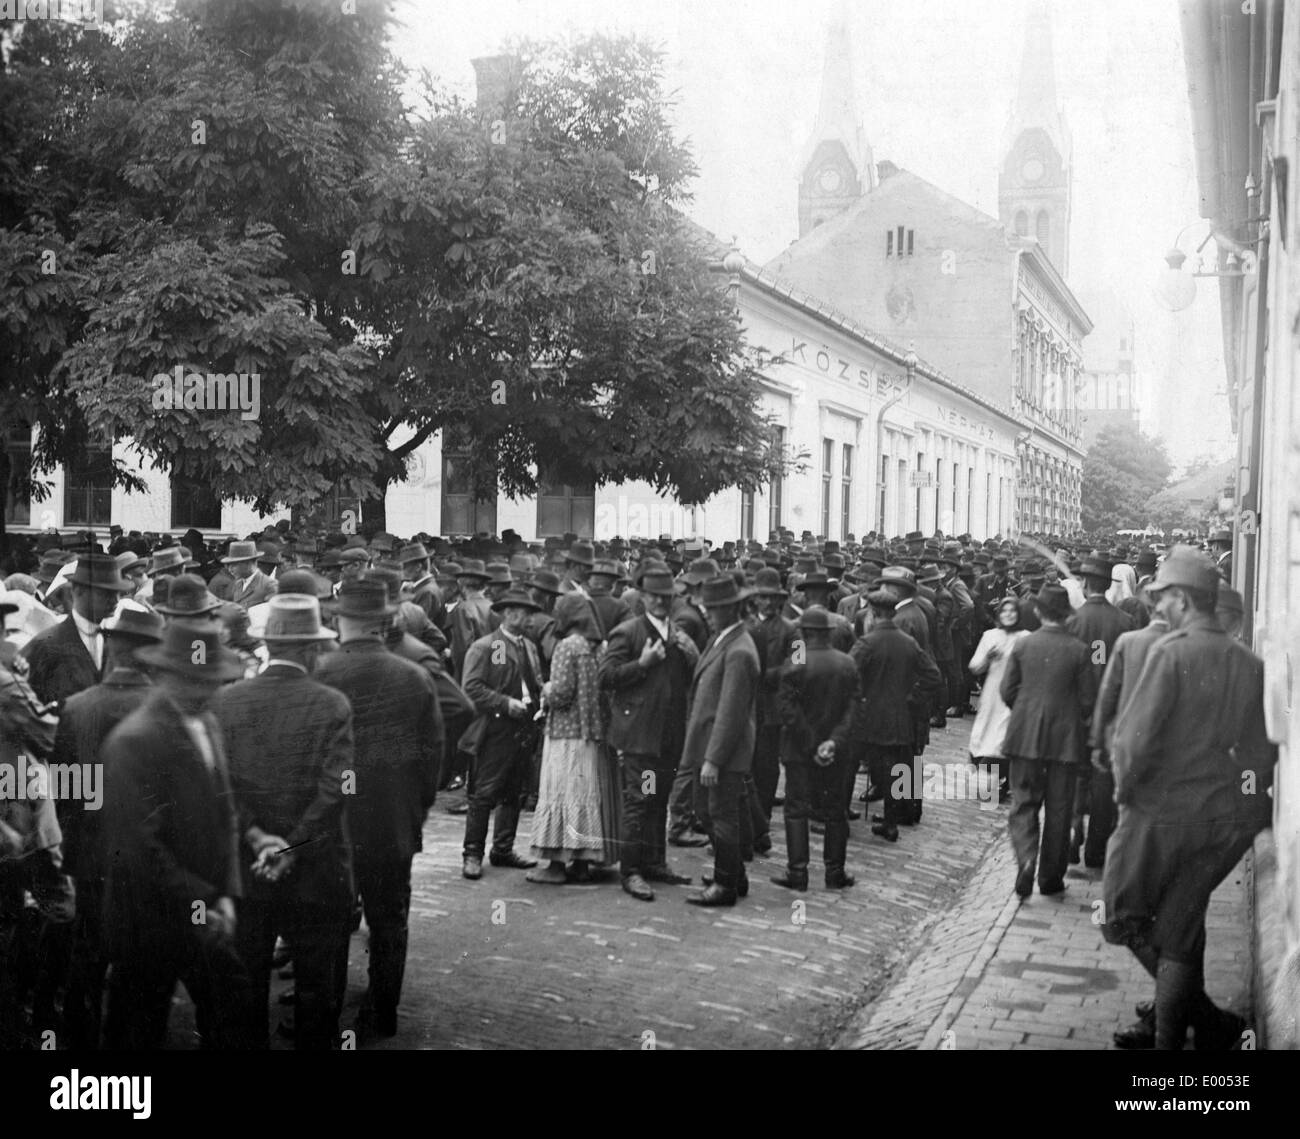 Sunday morning in an Hungarin city, 1918 Stock Photo